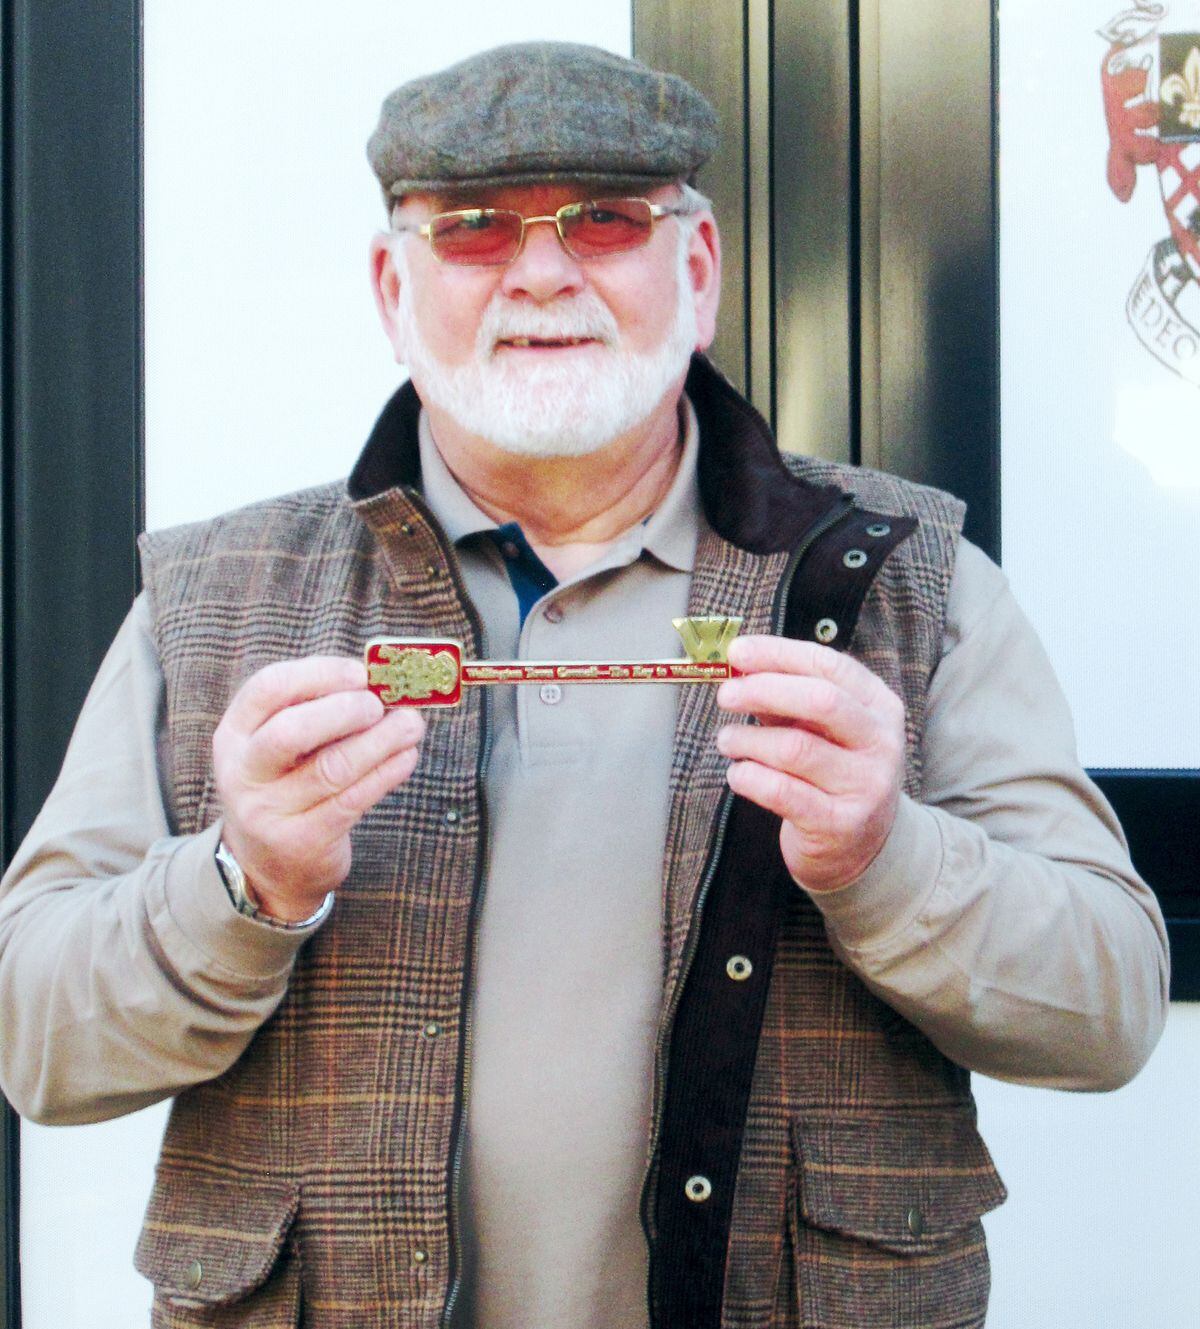 Allan was the first person to be awarded the "Key To Wellington."